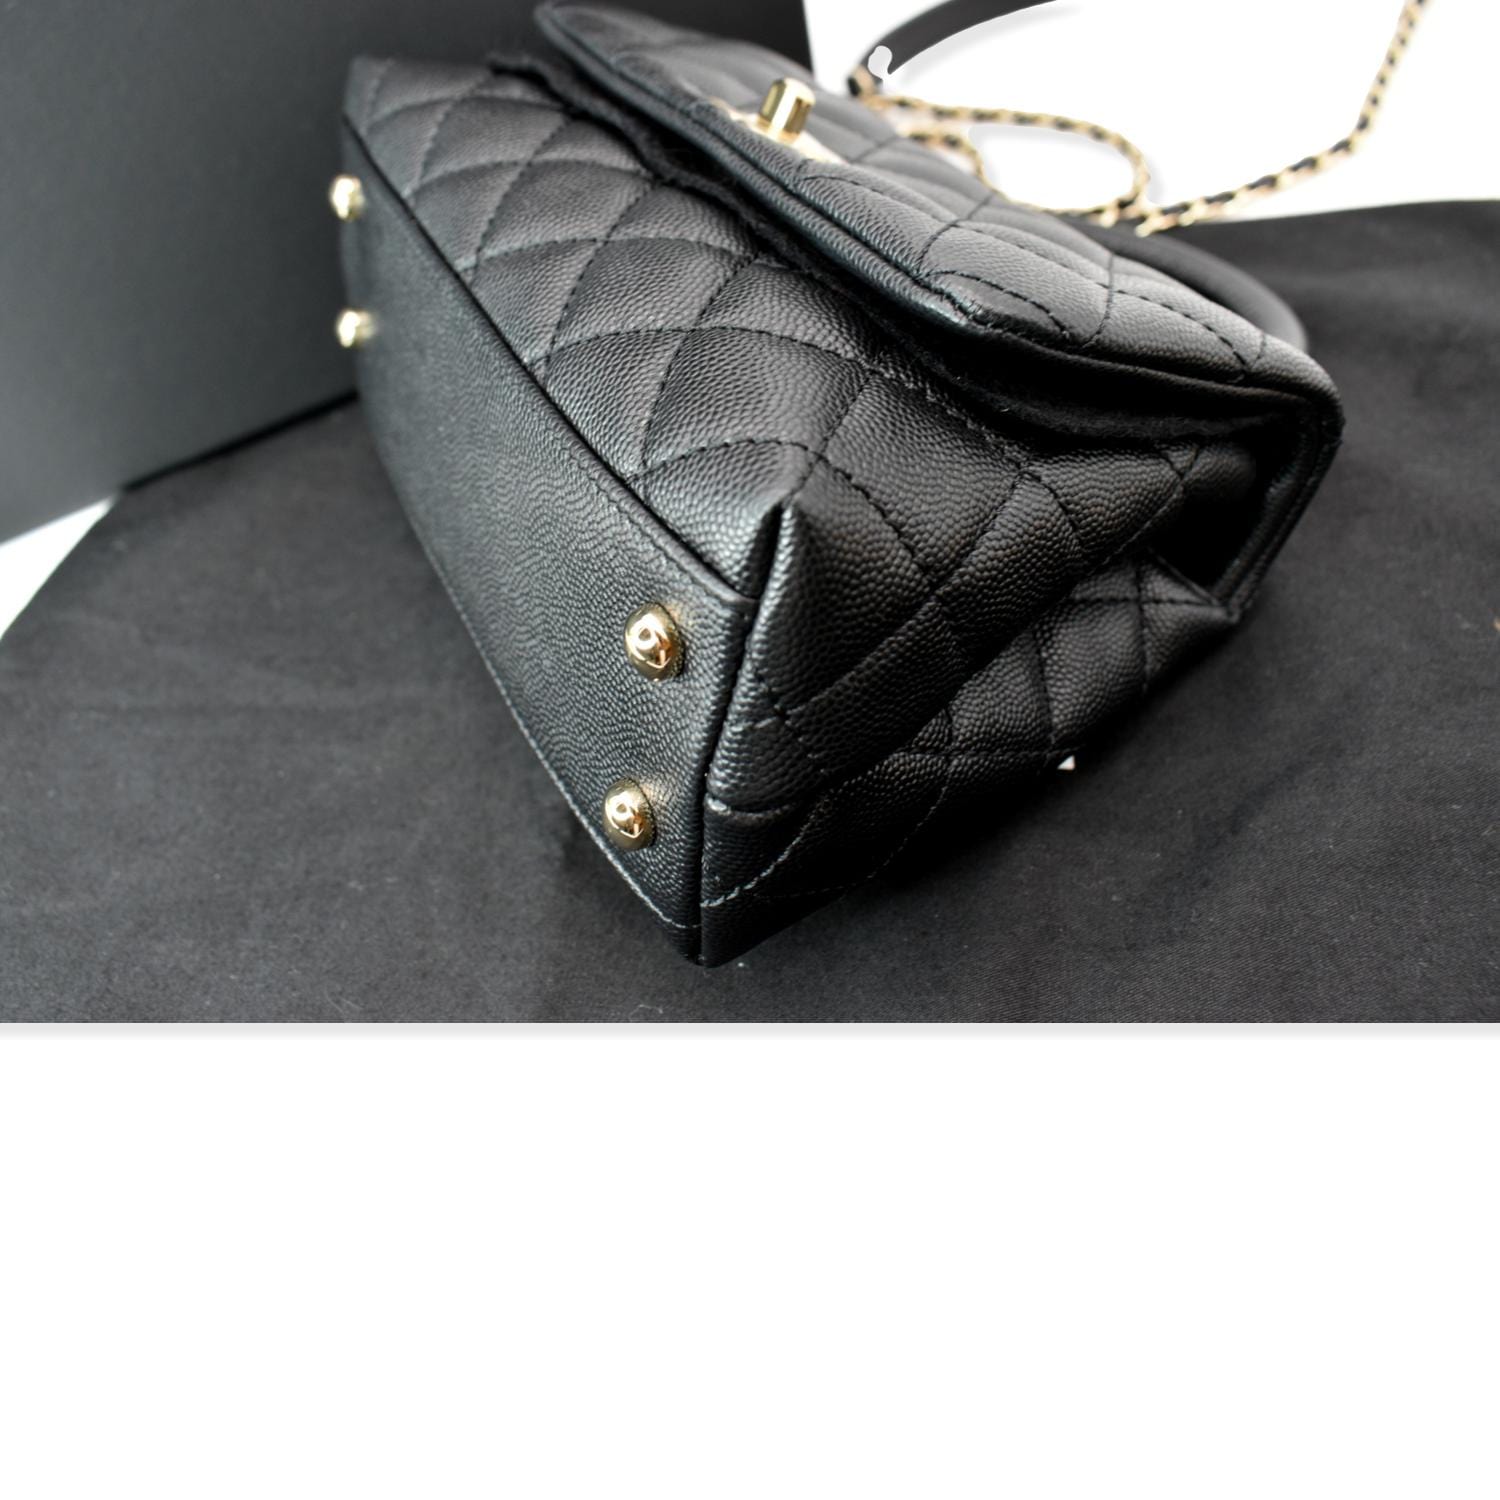 chanel flap bag with top handle black